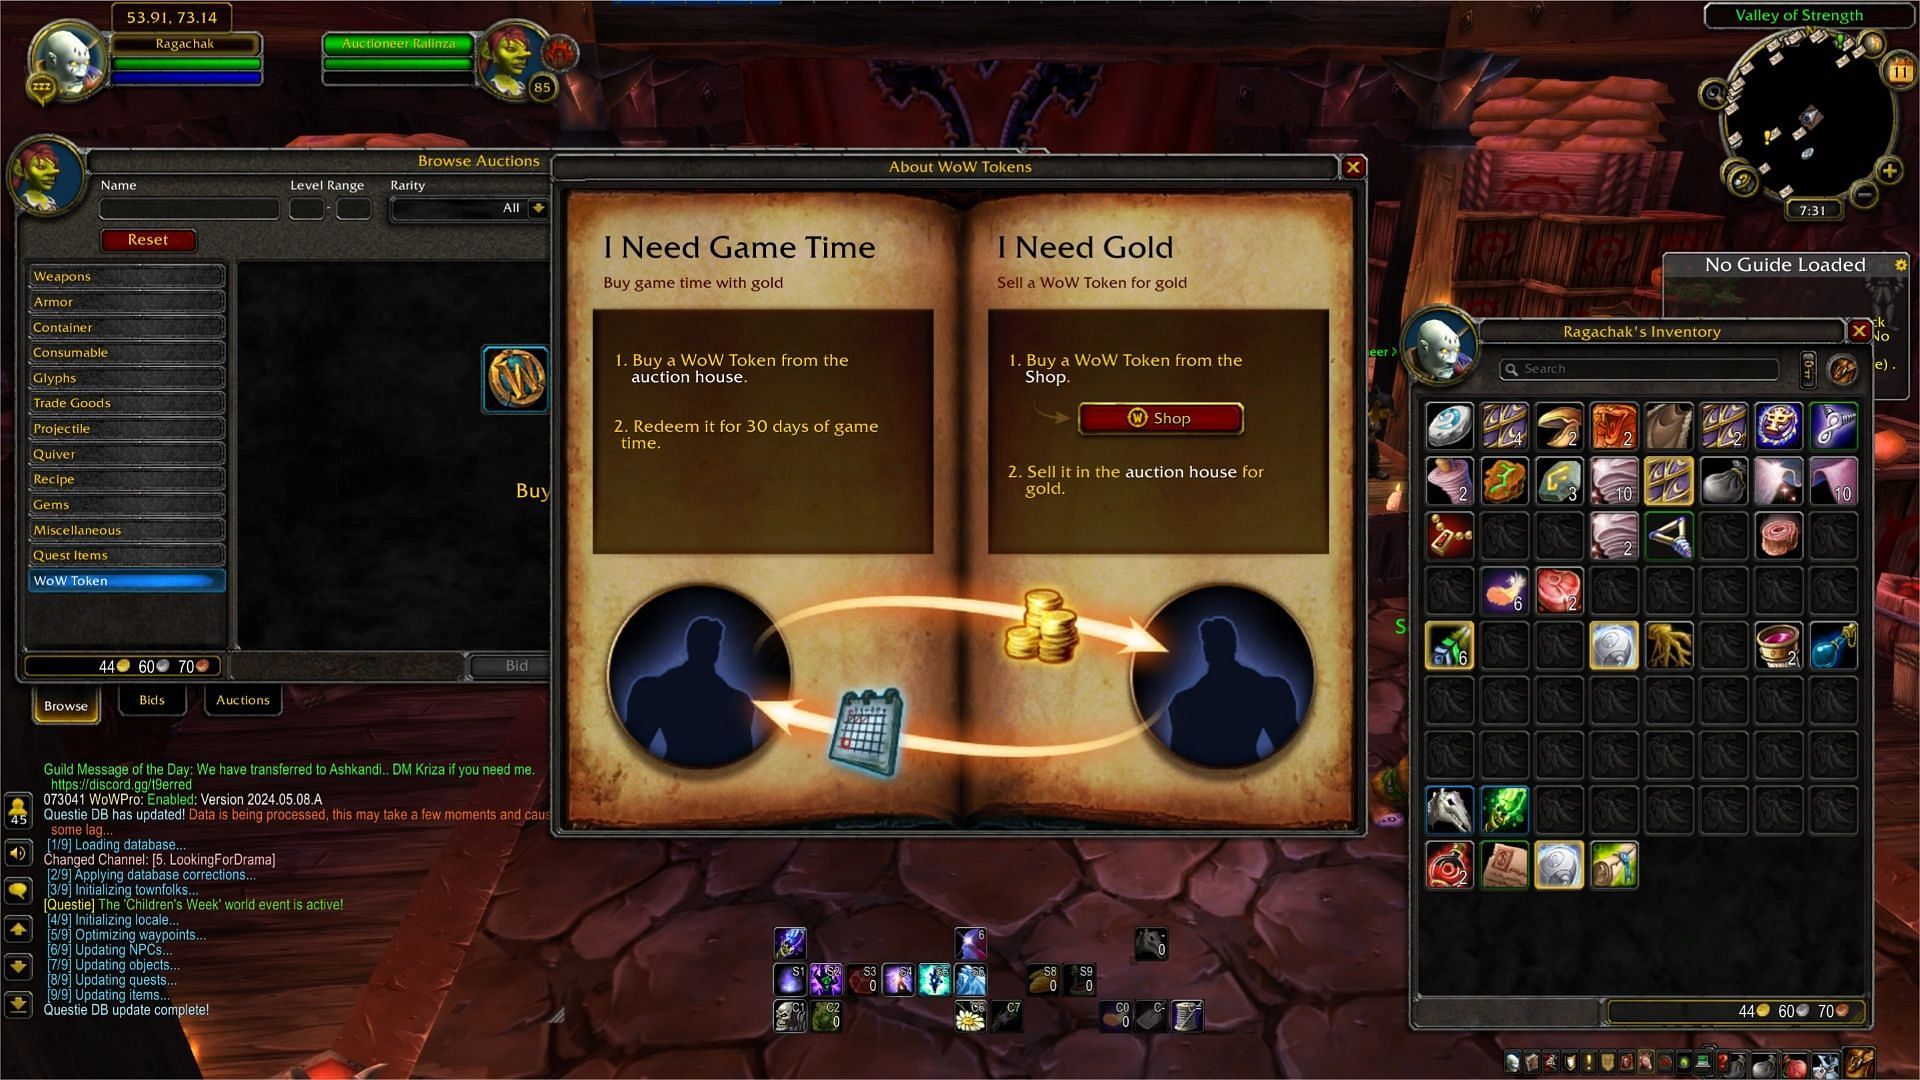 State-sponsored Gold Selling (Image via Blizzard Entertainment)